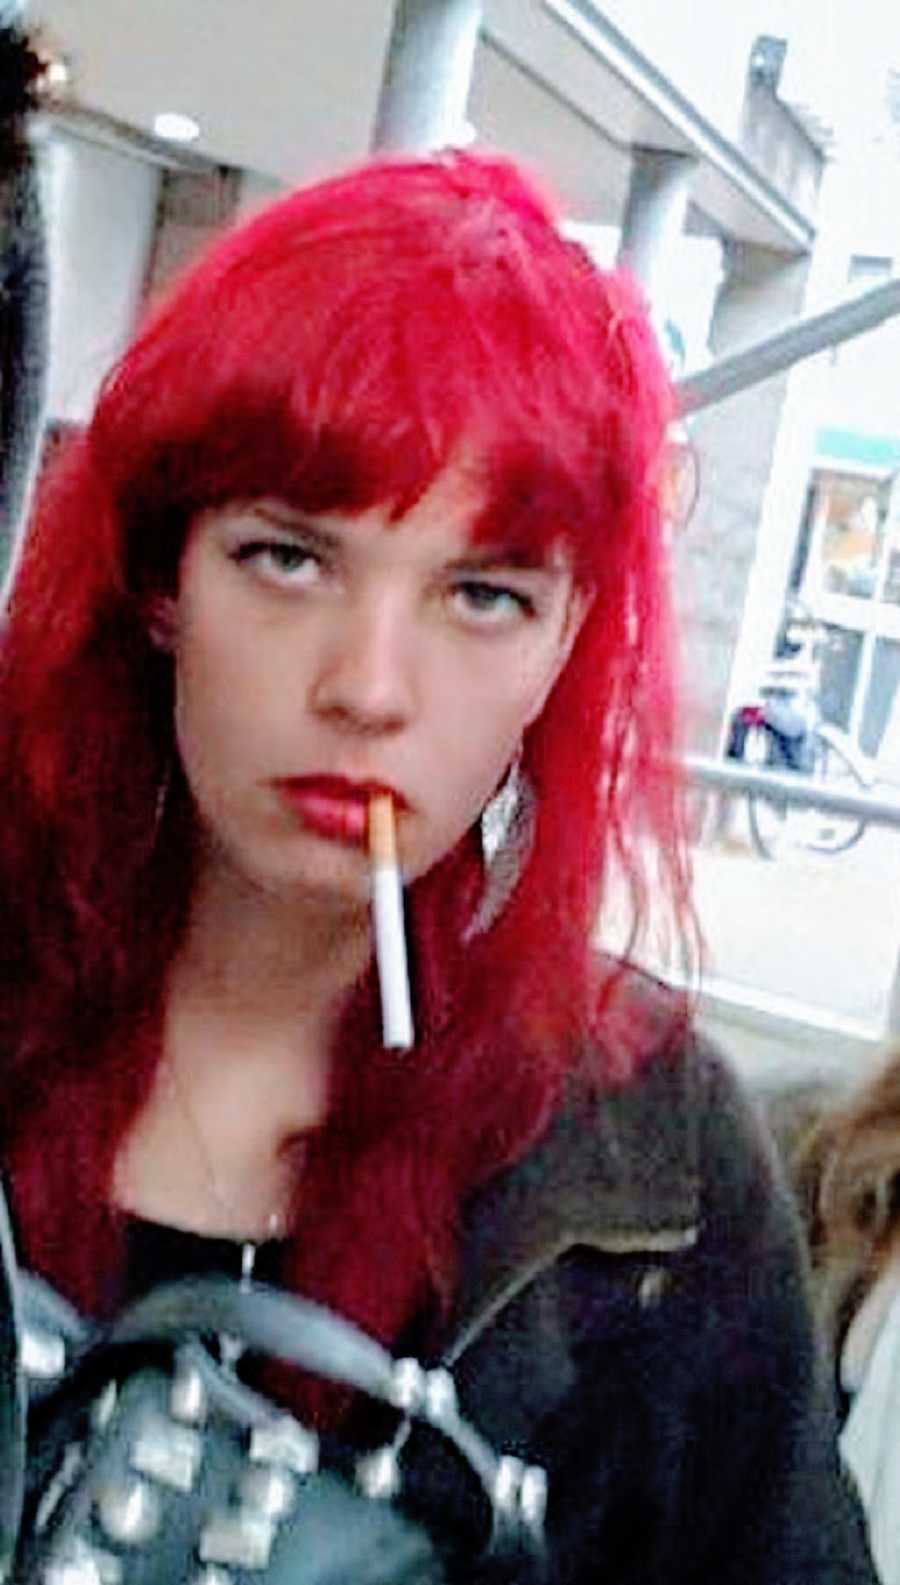 A young person with red hair holds a cigarette between their lips